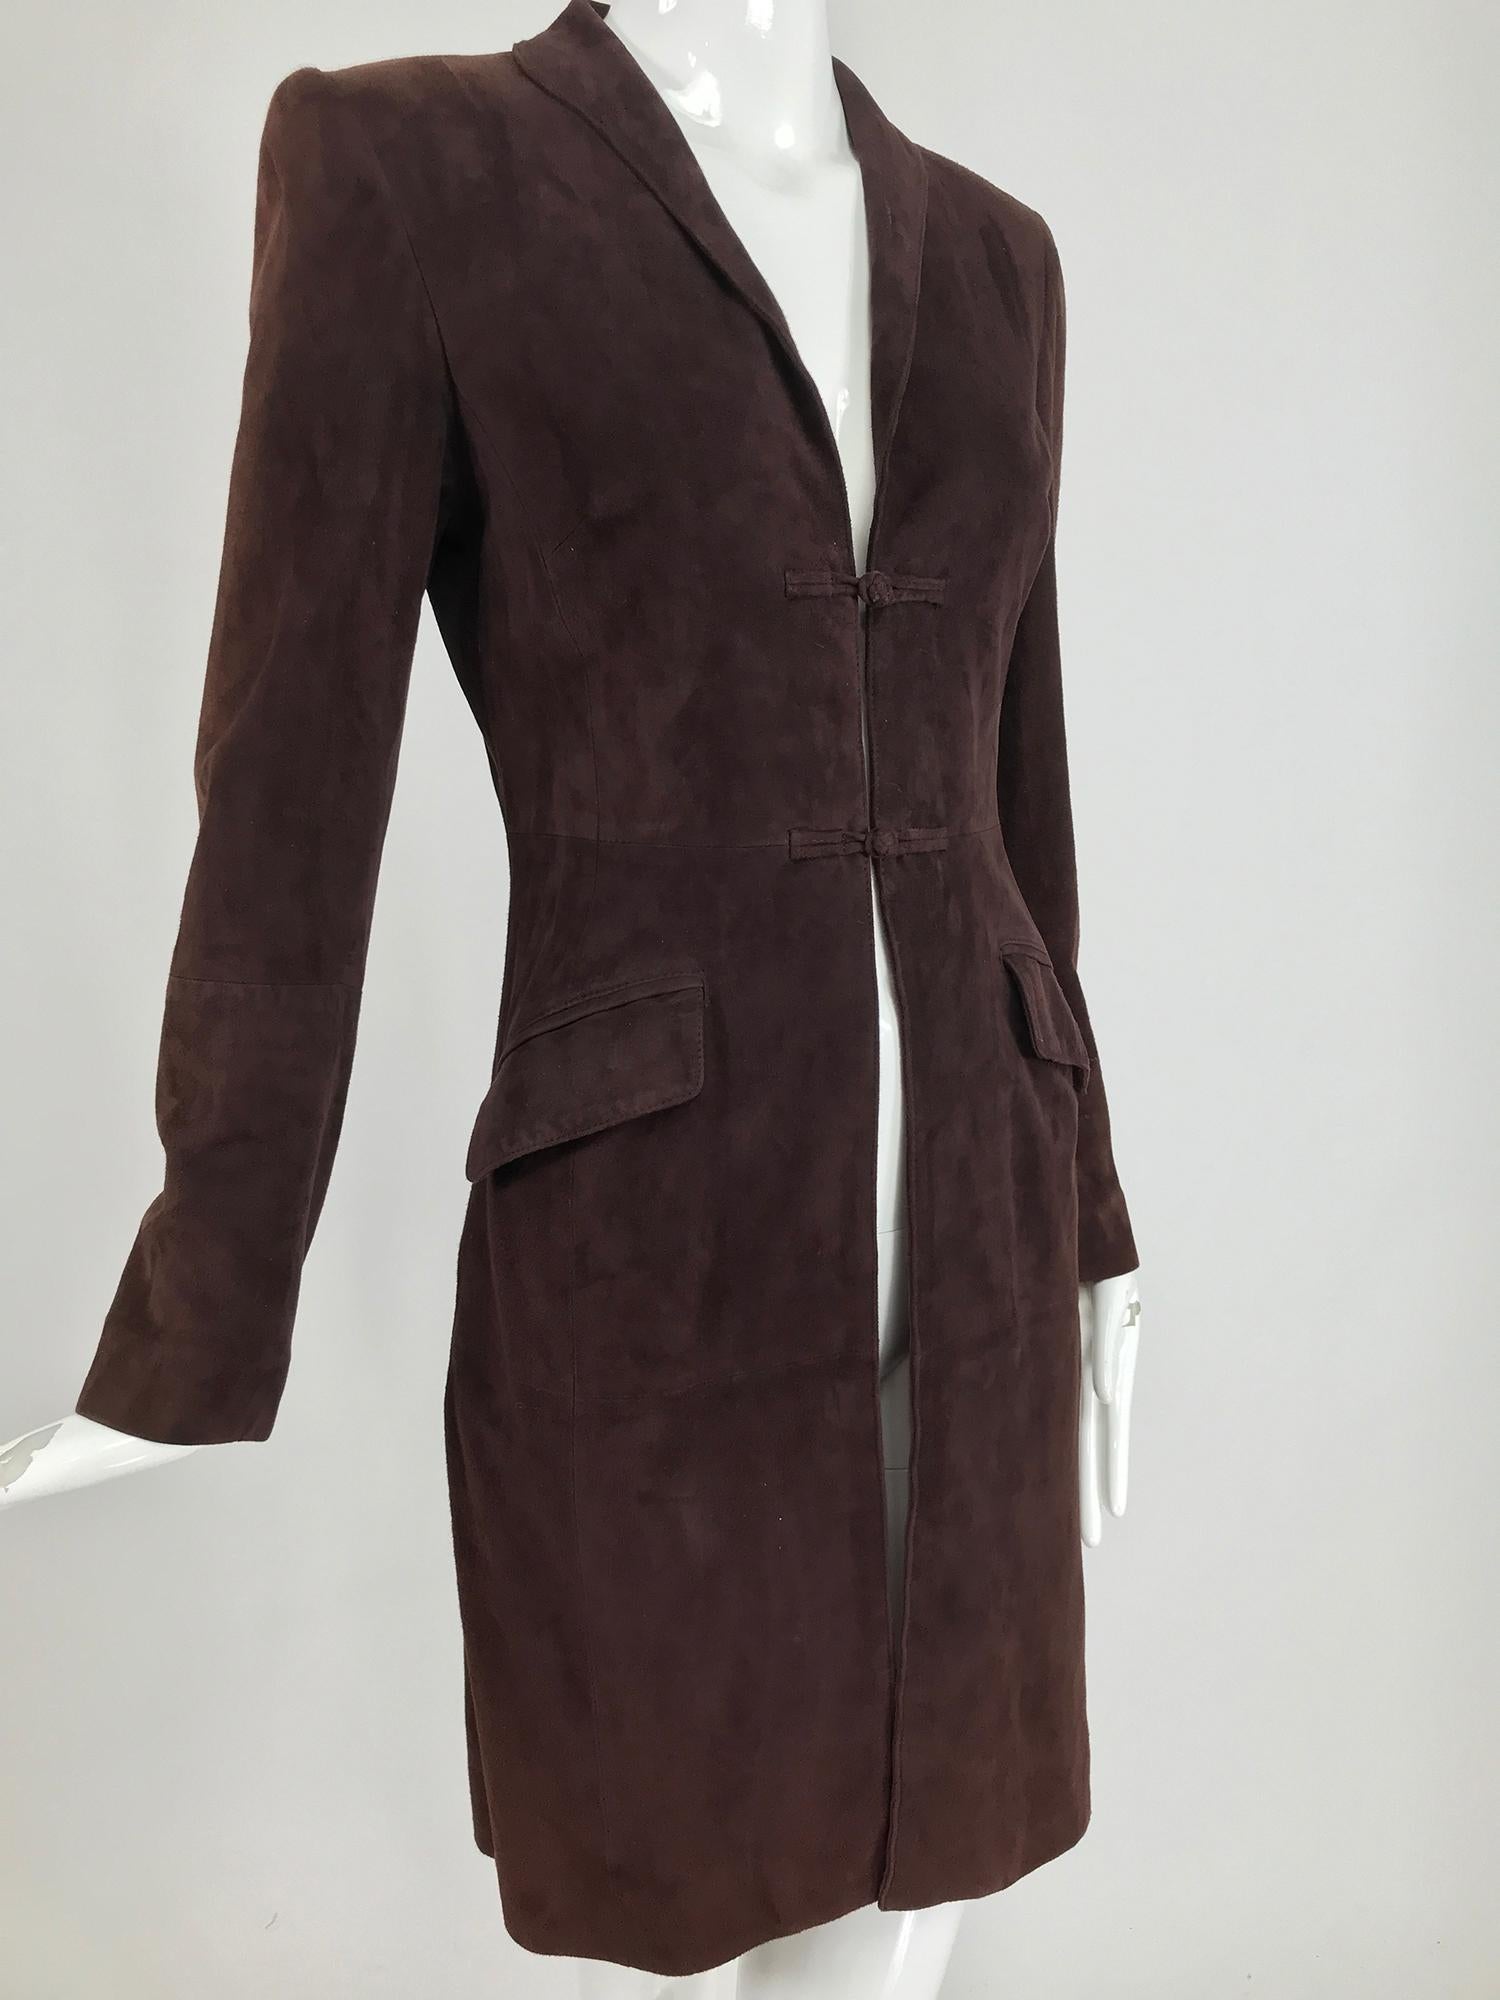 Vintage Shanghai Tang 1930s inspired dark wine lamb suede coat from the 1990s. A line coat closes at the front with two suede frogs, narrow notched lapel collar and long sleeves that have knotted suede buttons at each cuff. The suede is extra soft